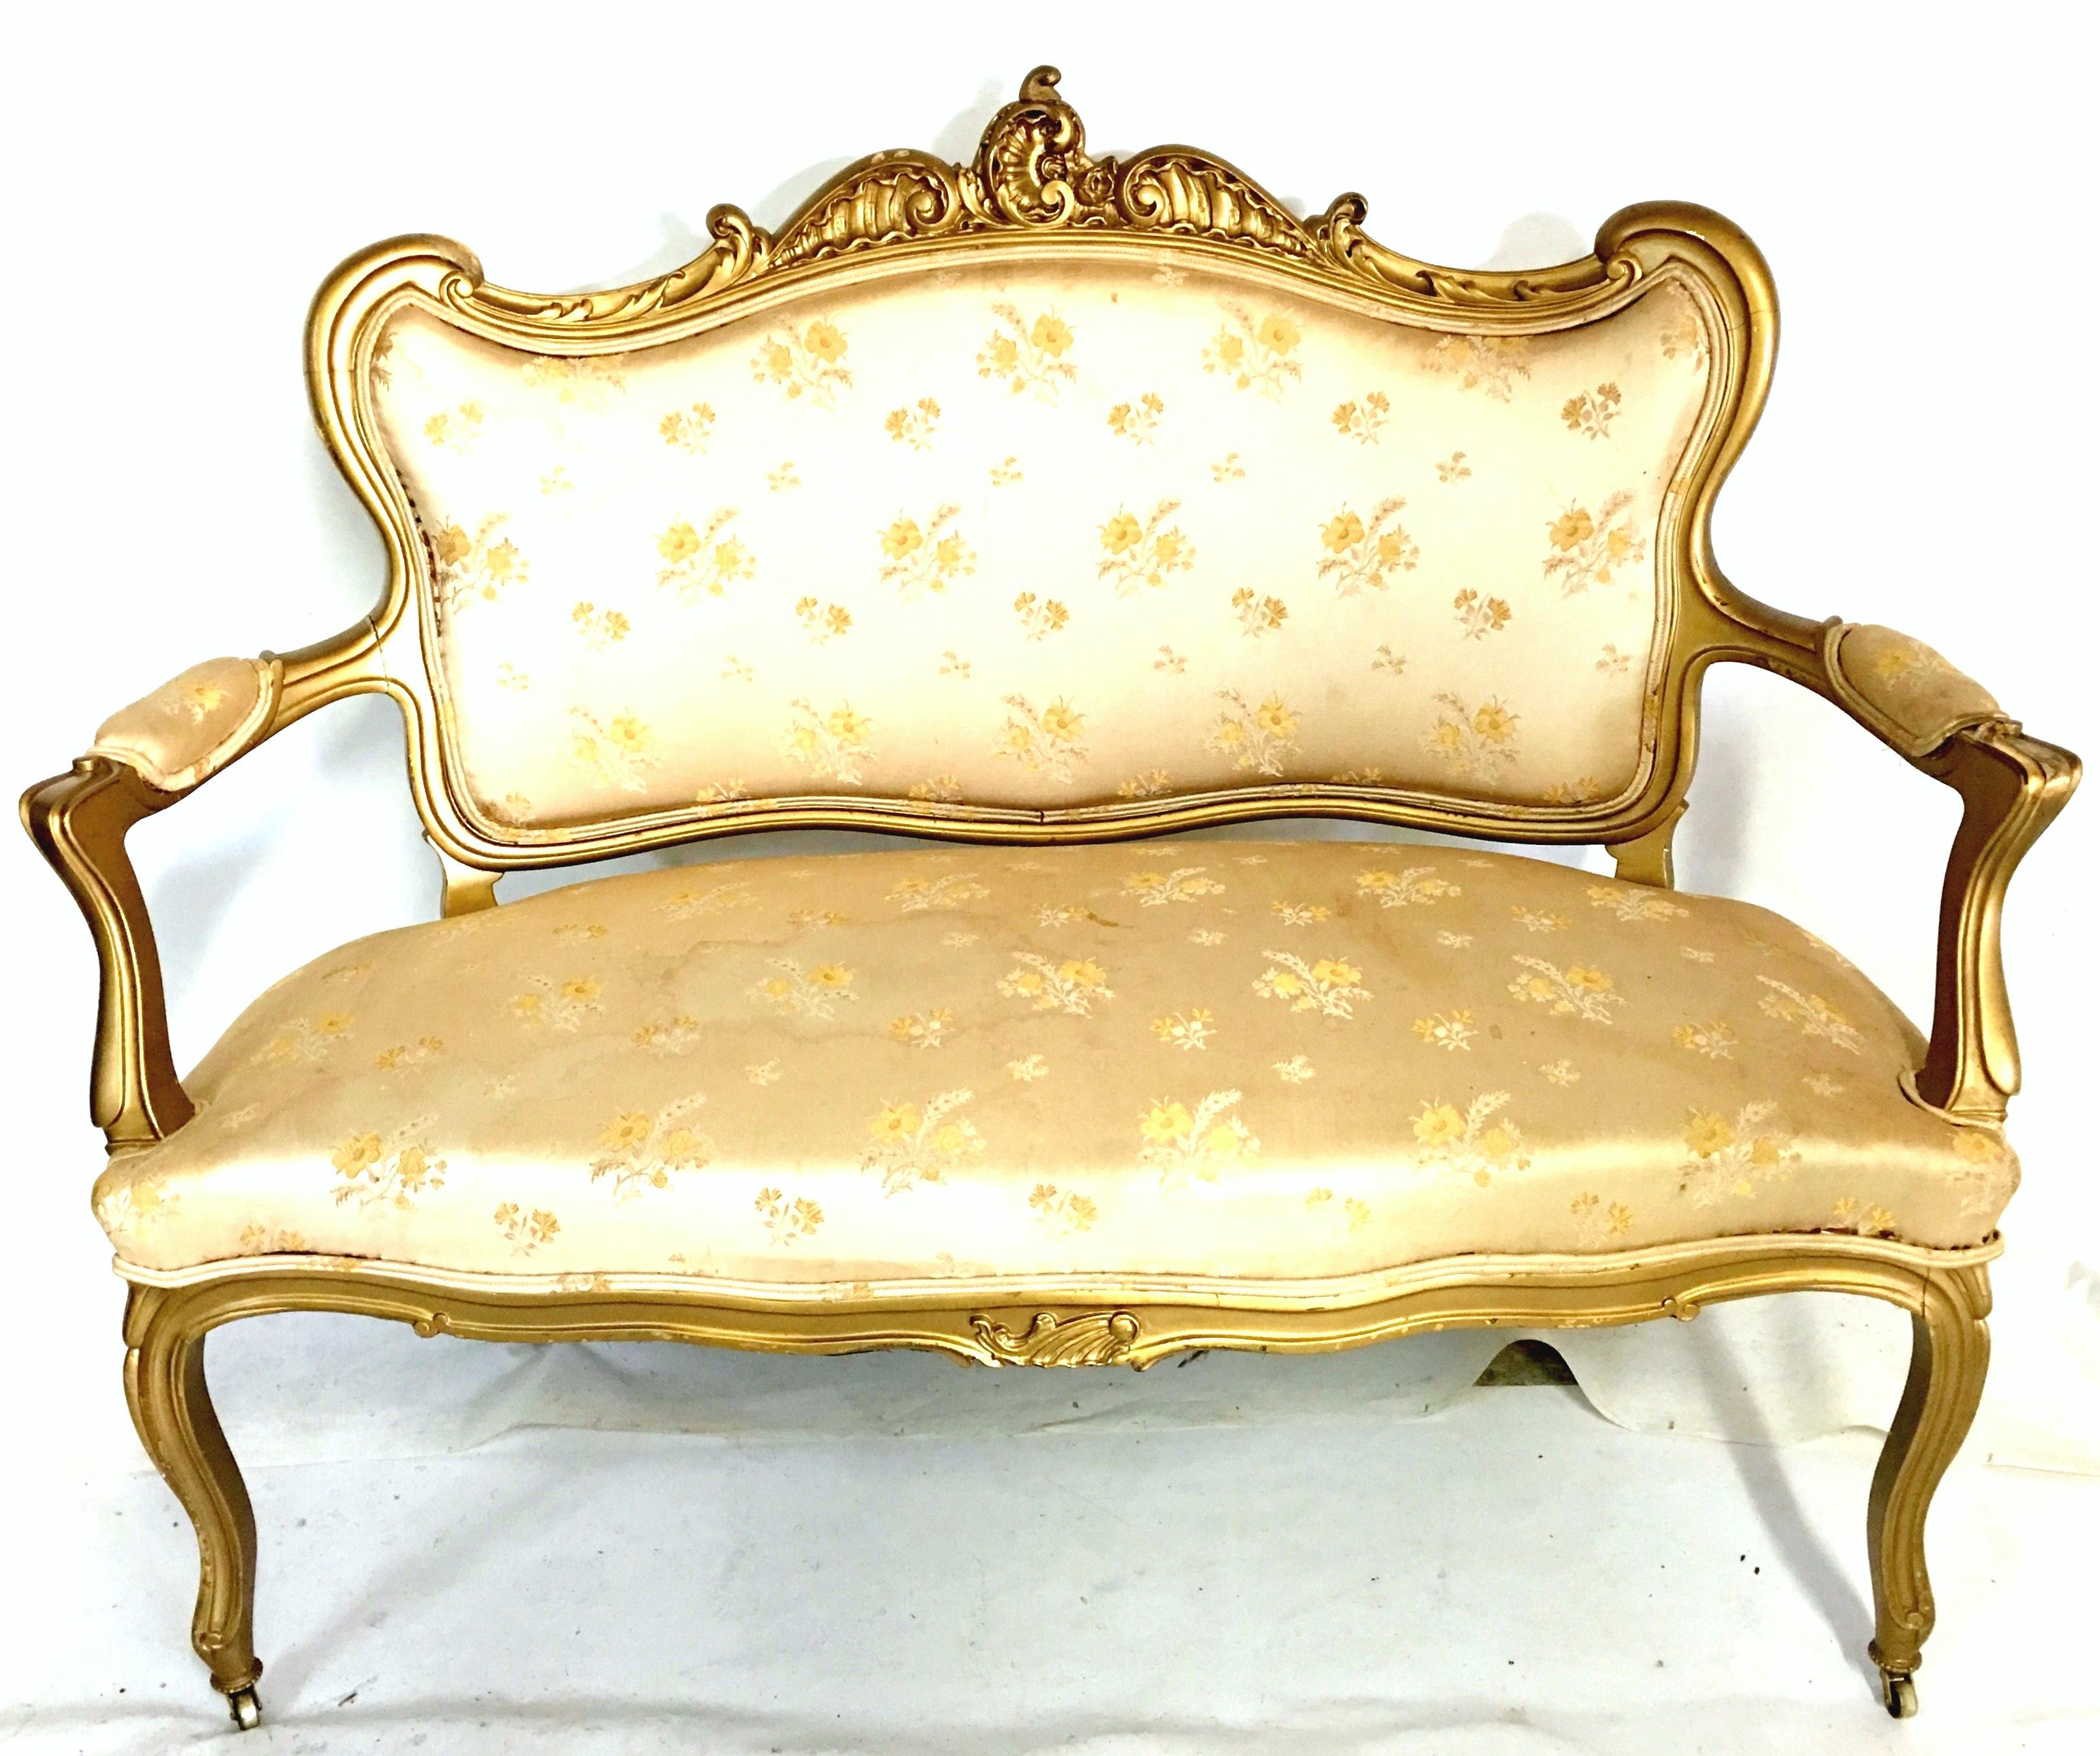 19th century French Louis XV style gilt gold beech wood three-piece parlor set. This French hand carved beech wood parlor set procured from a French estate, maintains the original and authentic hand painted 24-karat gold gilt under gold over paint.